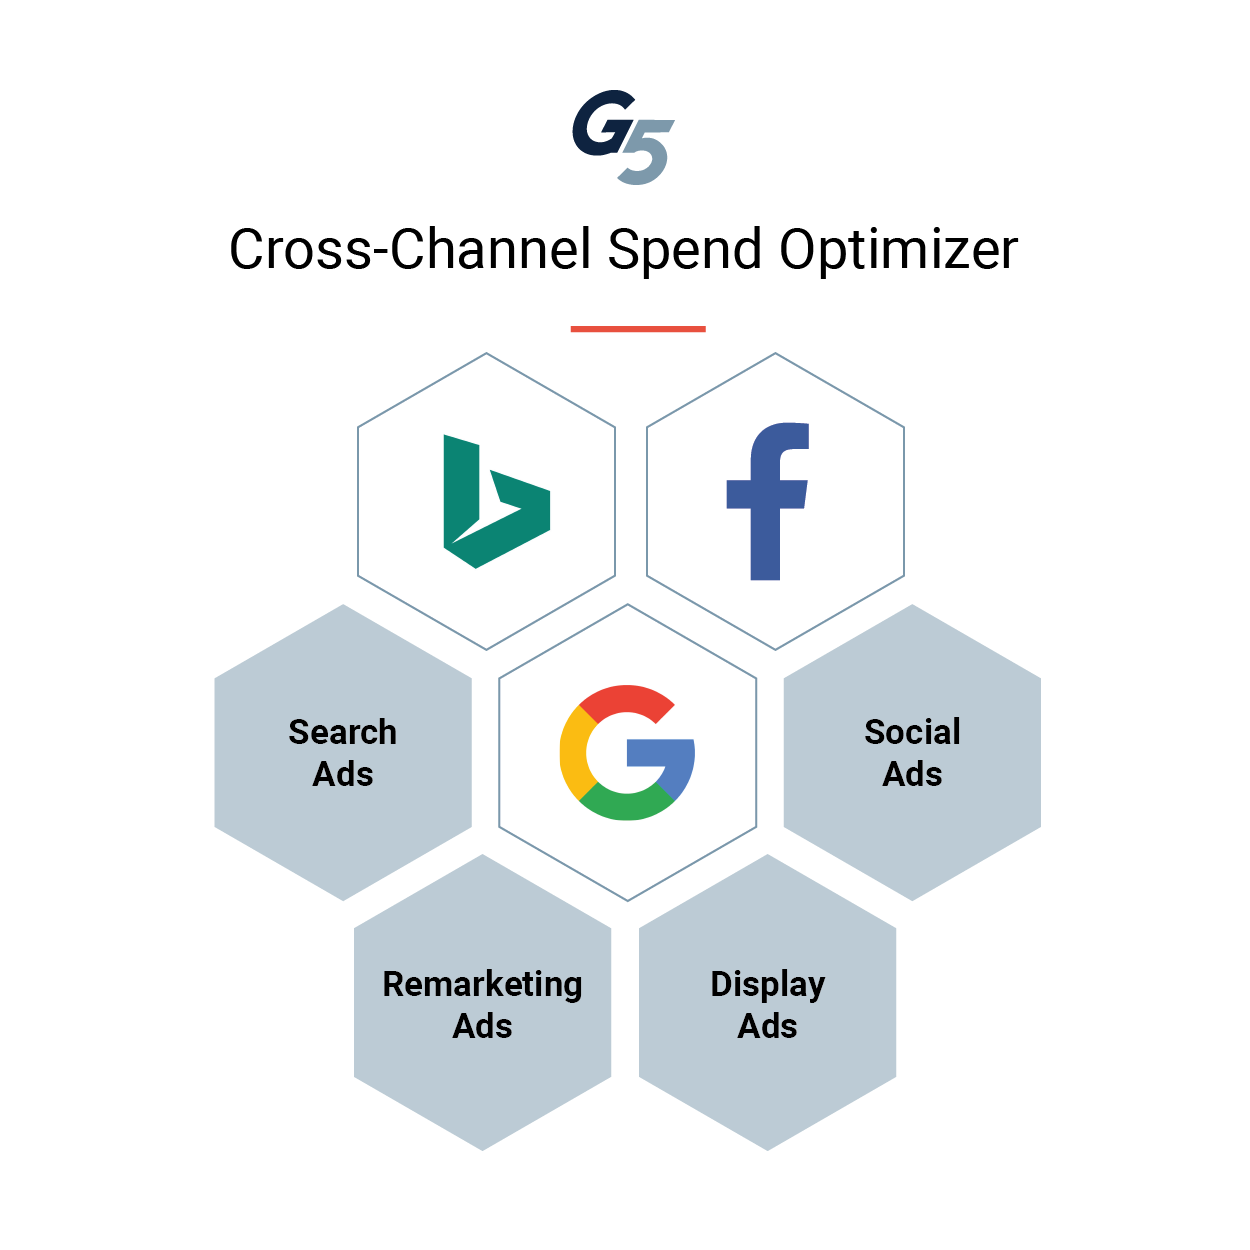 G5 Cross-Channel Spend Optimizer